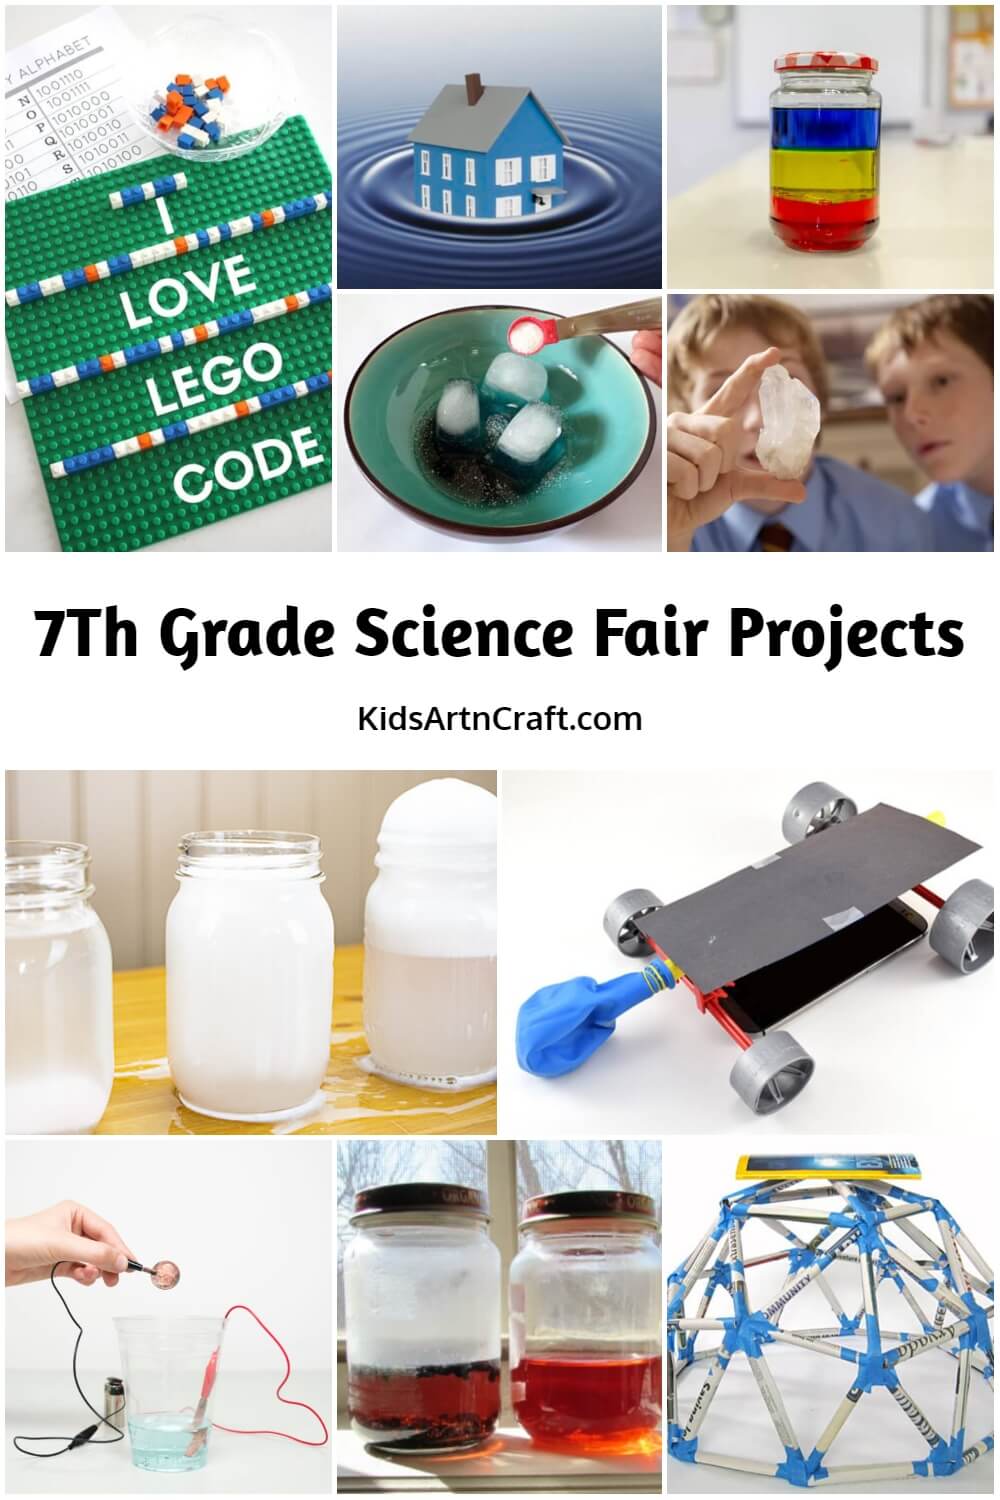 7Th Grade Science Fair Projects